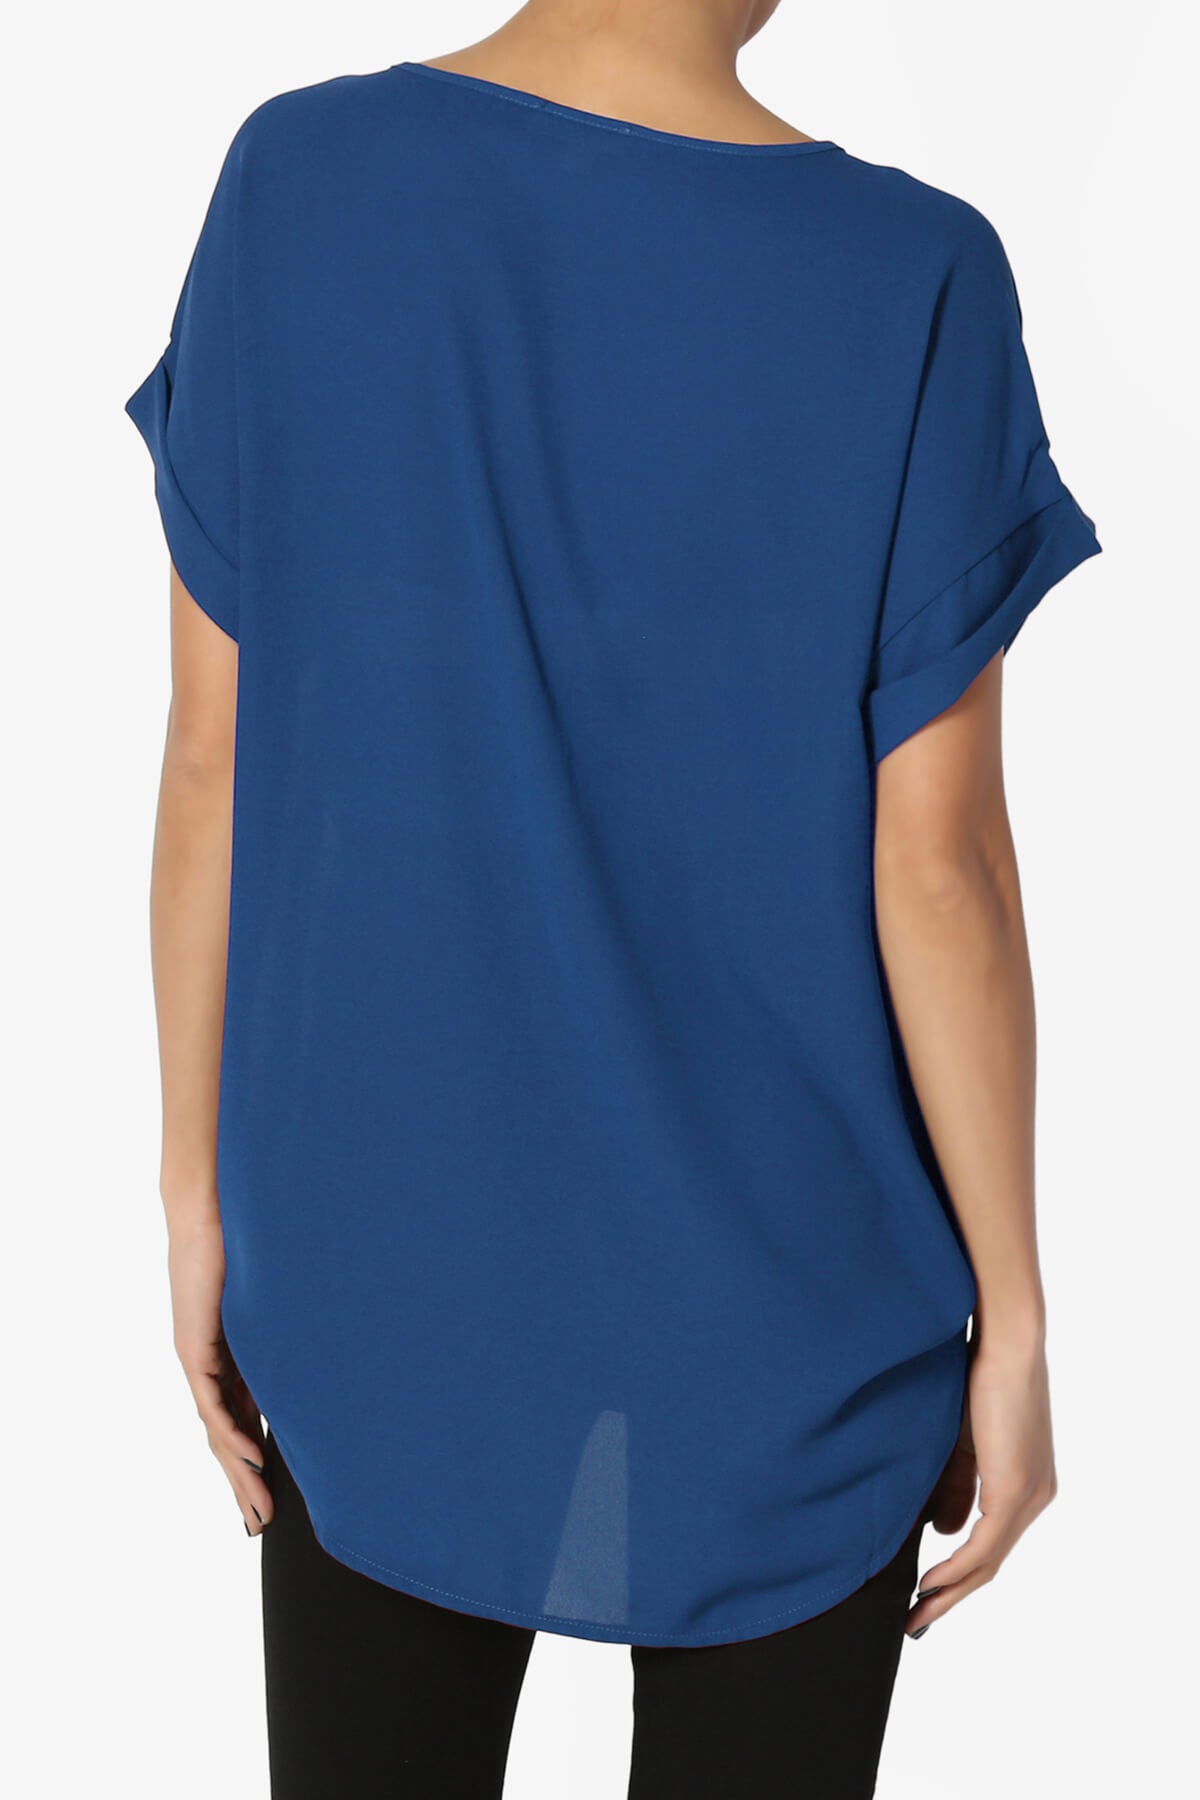 Load image into Gallery viewer, Juliette Boat Neck Chiffon Top SAPPHIRE_2
